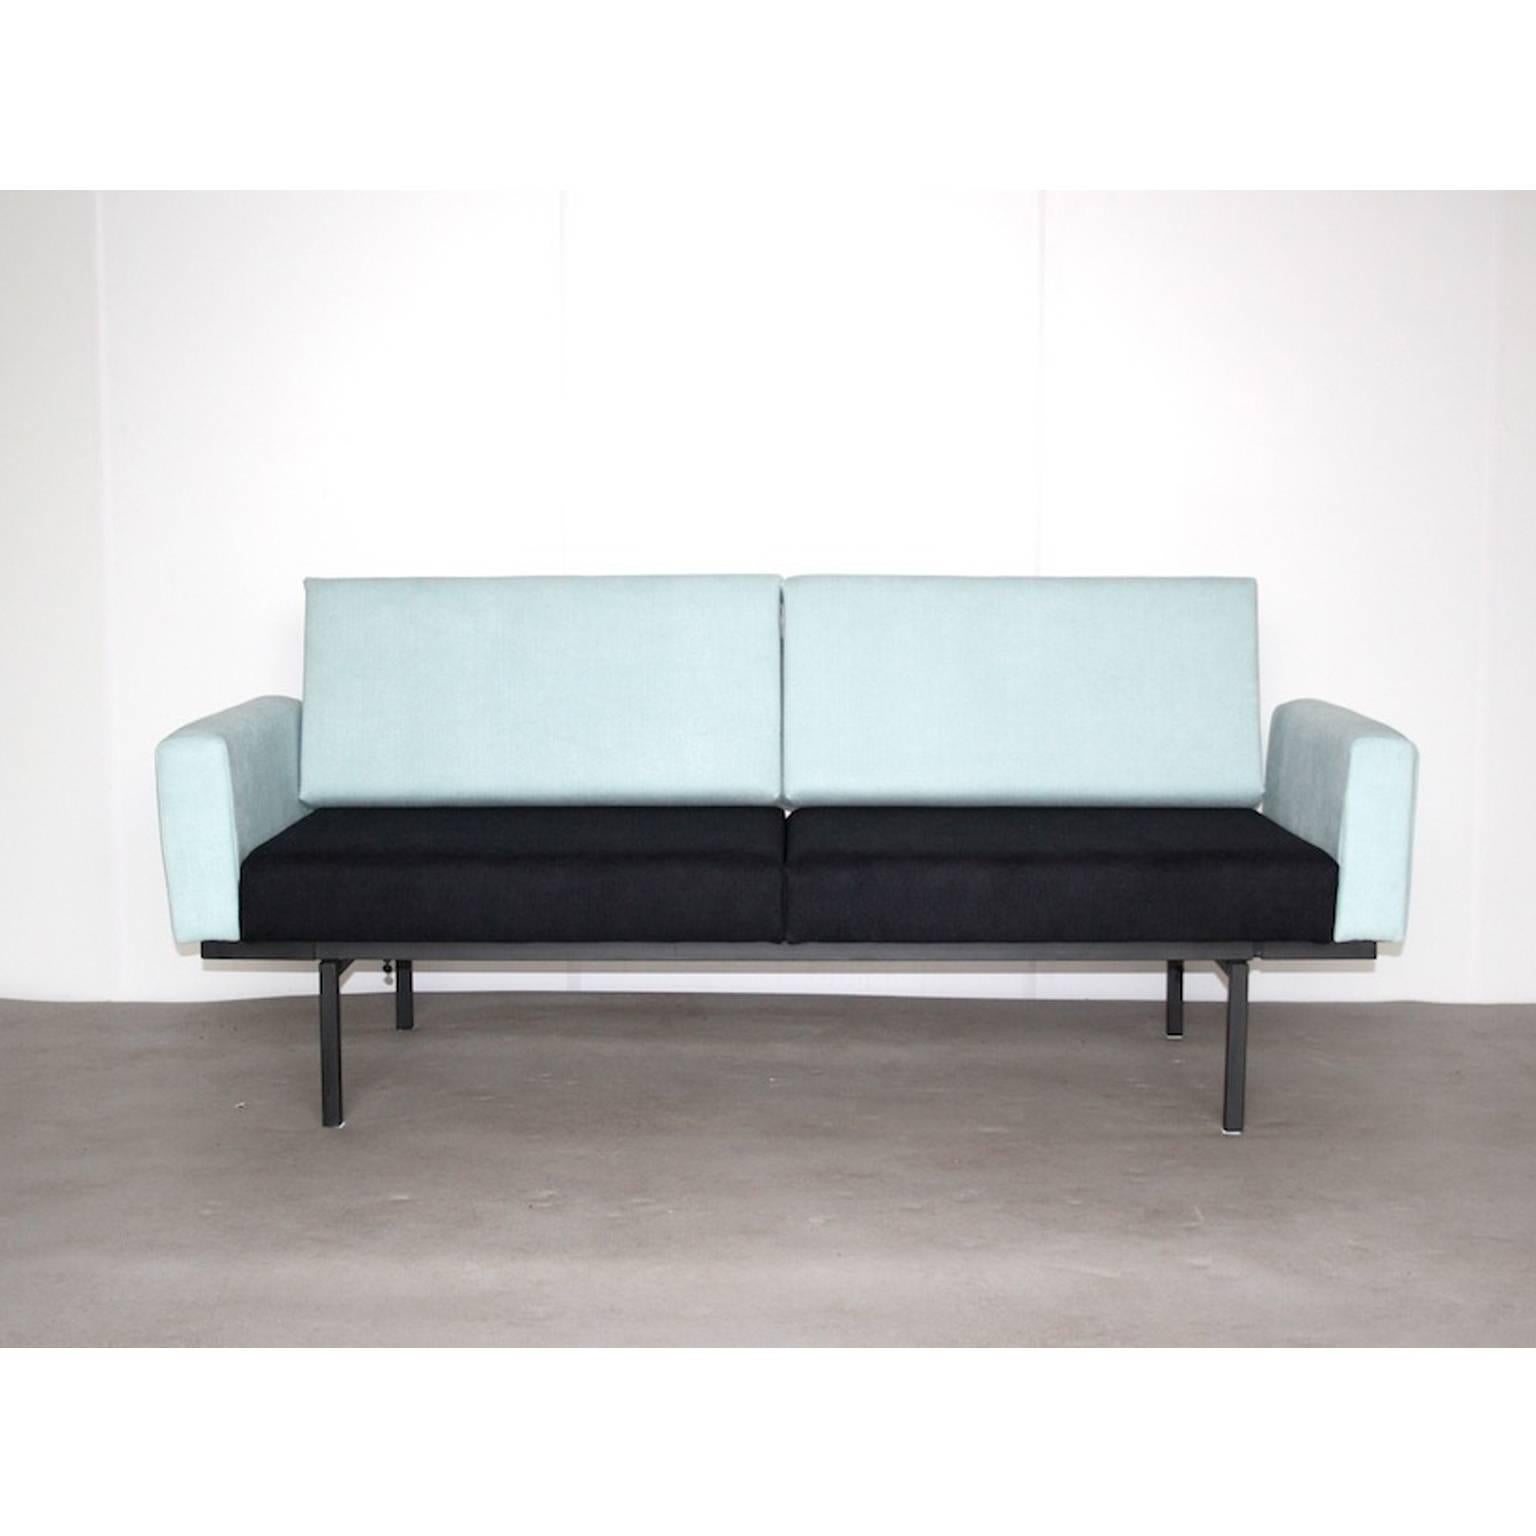 Sofa or daybed by Coen de Vries for Devo, Dutch design, 1952

Super rare sleeper sofa with armrests by Dutch designer Coen de Vries from 1952. Coen de Vries was probably one of the most important Dutch Industrial furniture designers of the